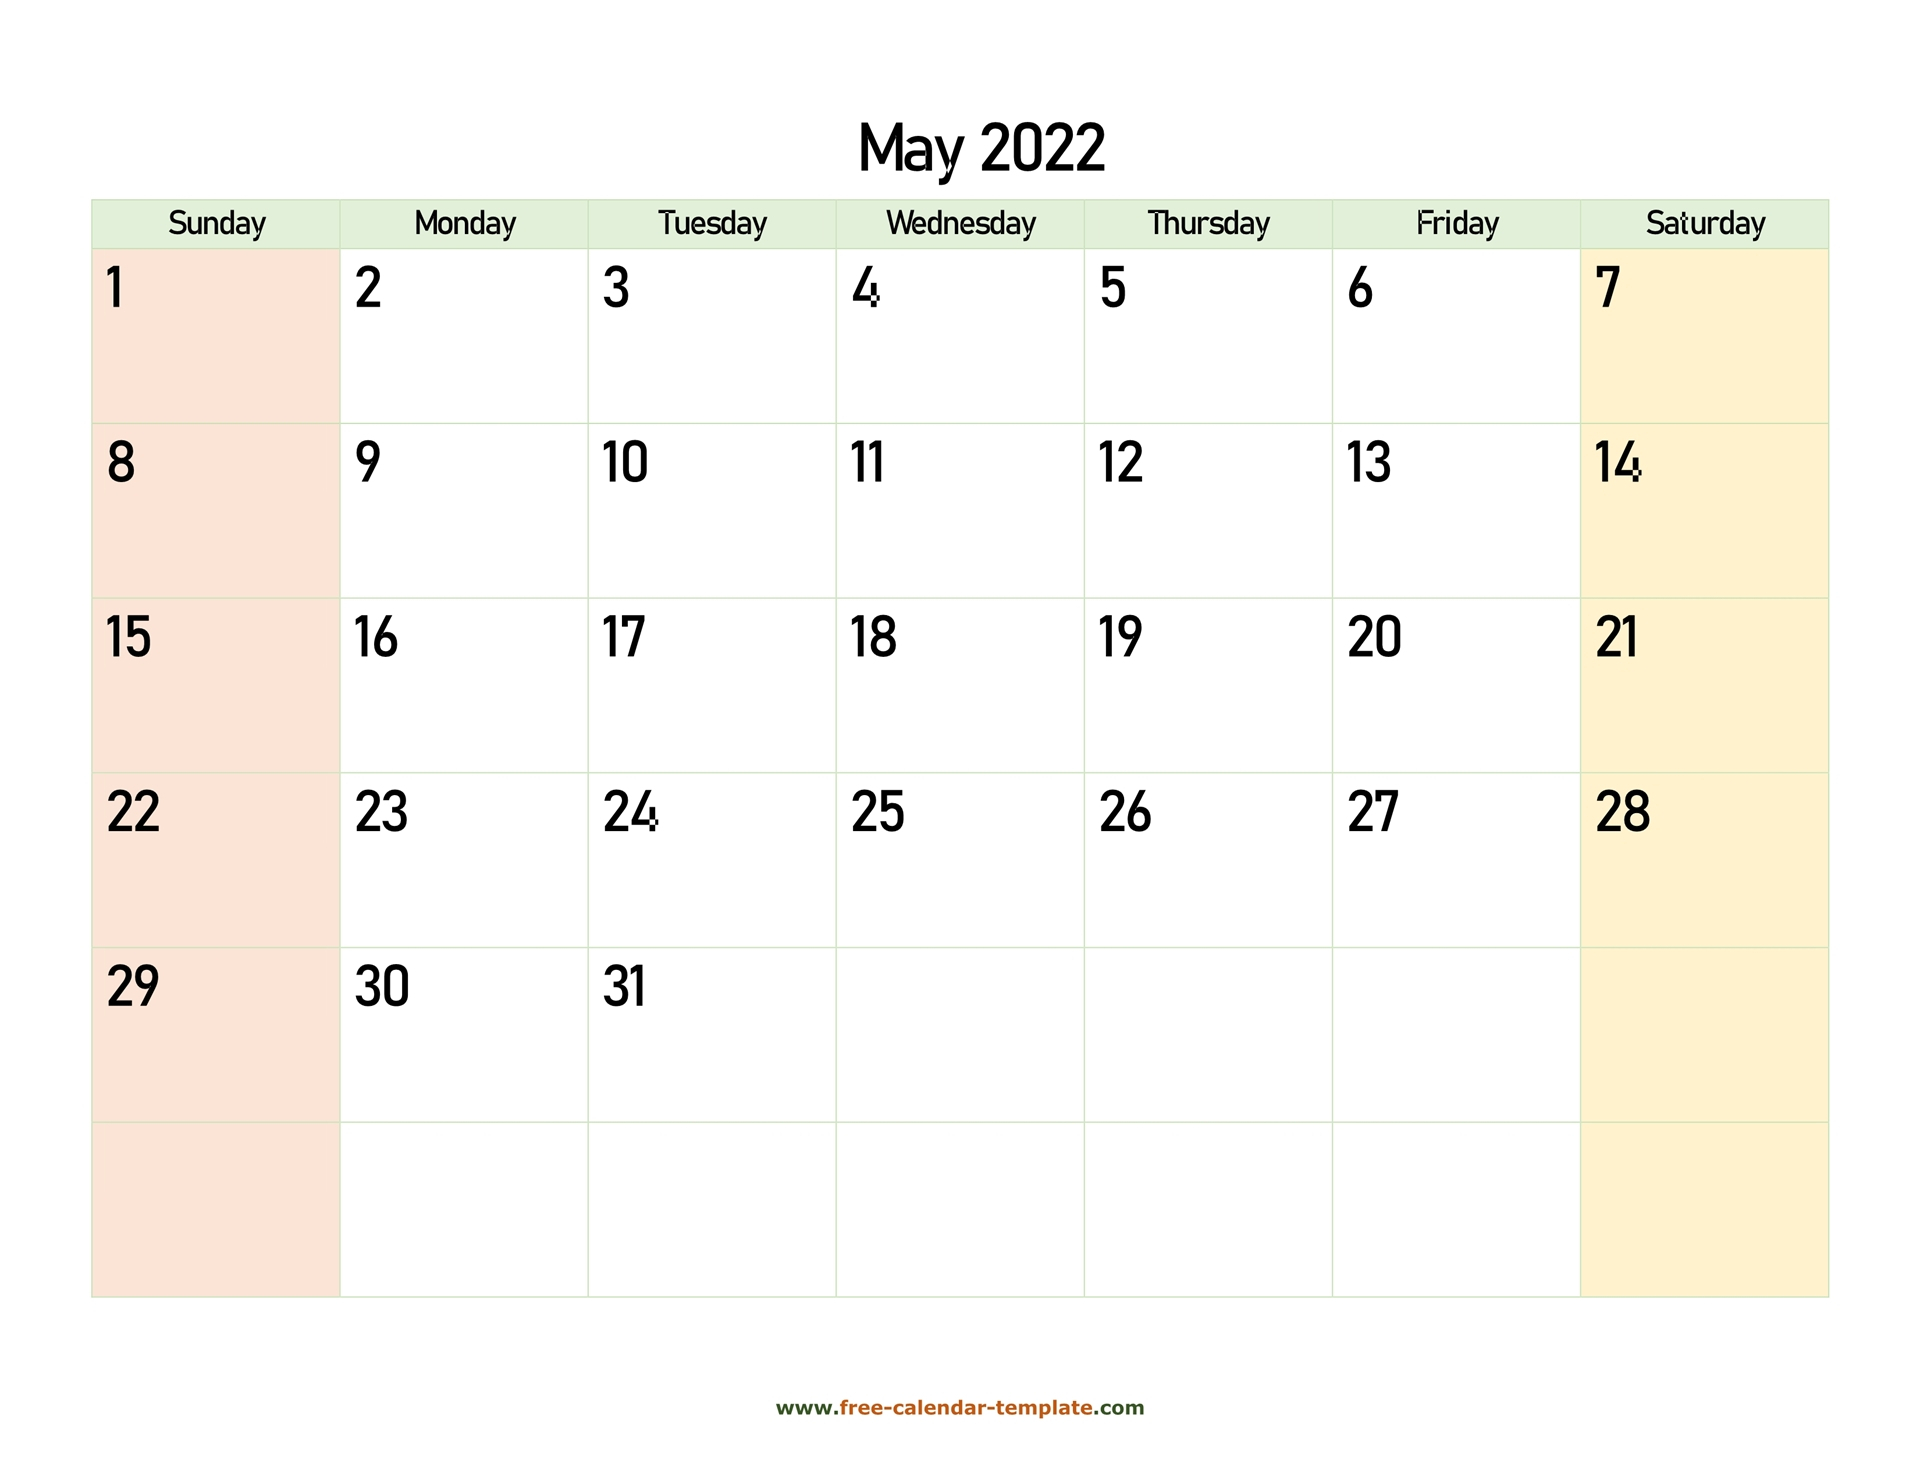 May 2022 Calendar Printable With Coloring On Weekend